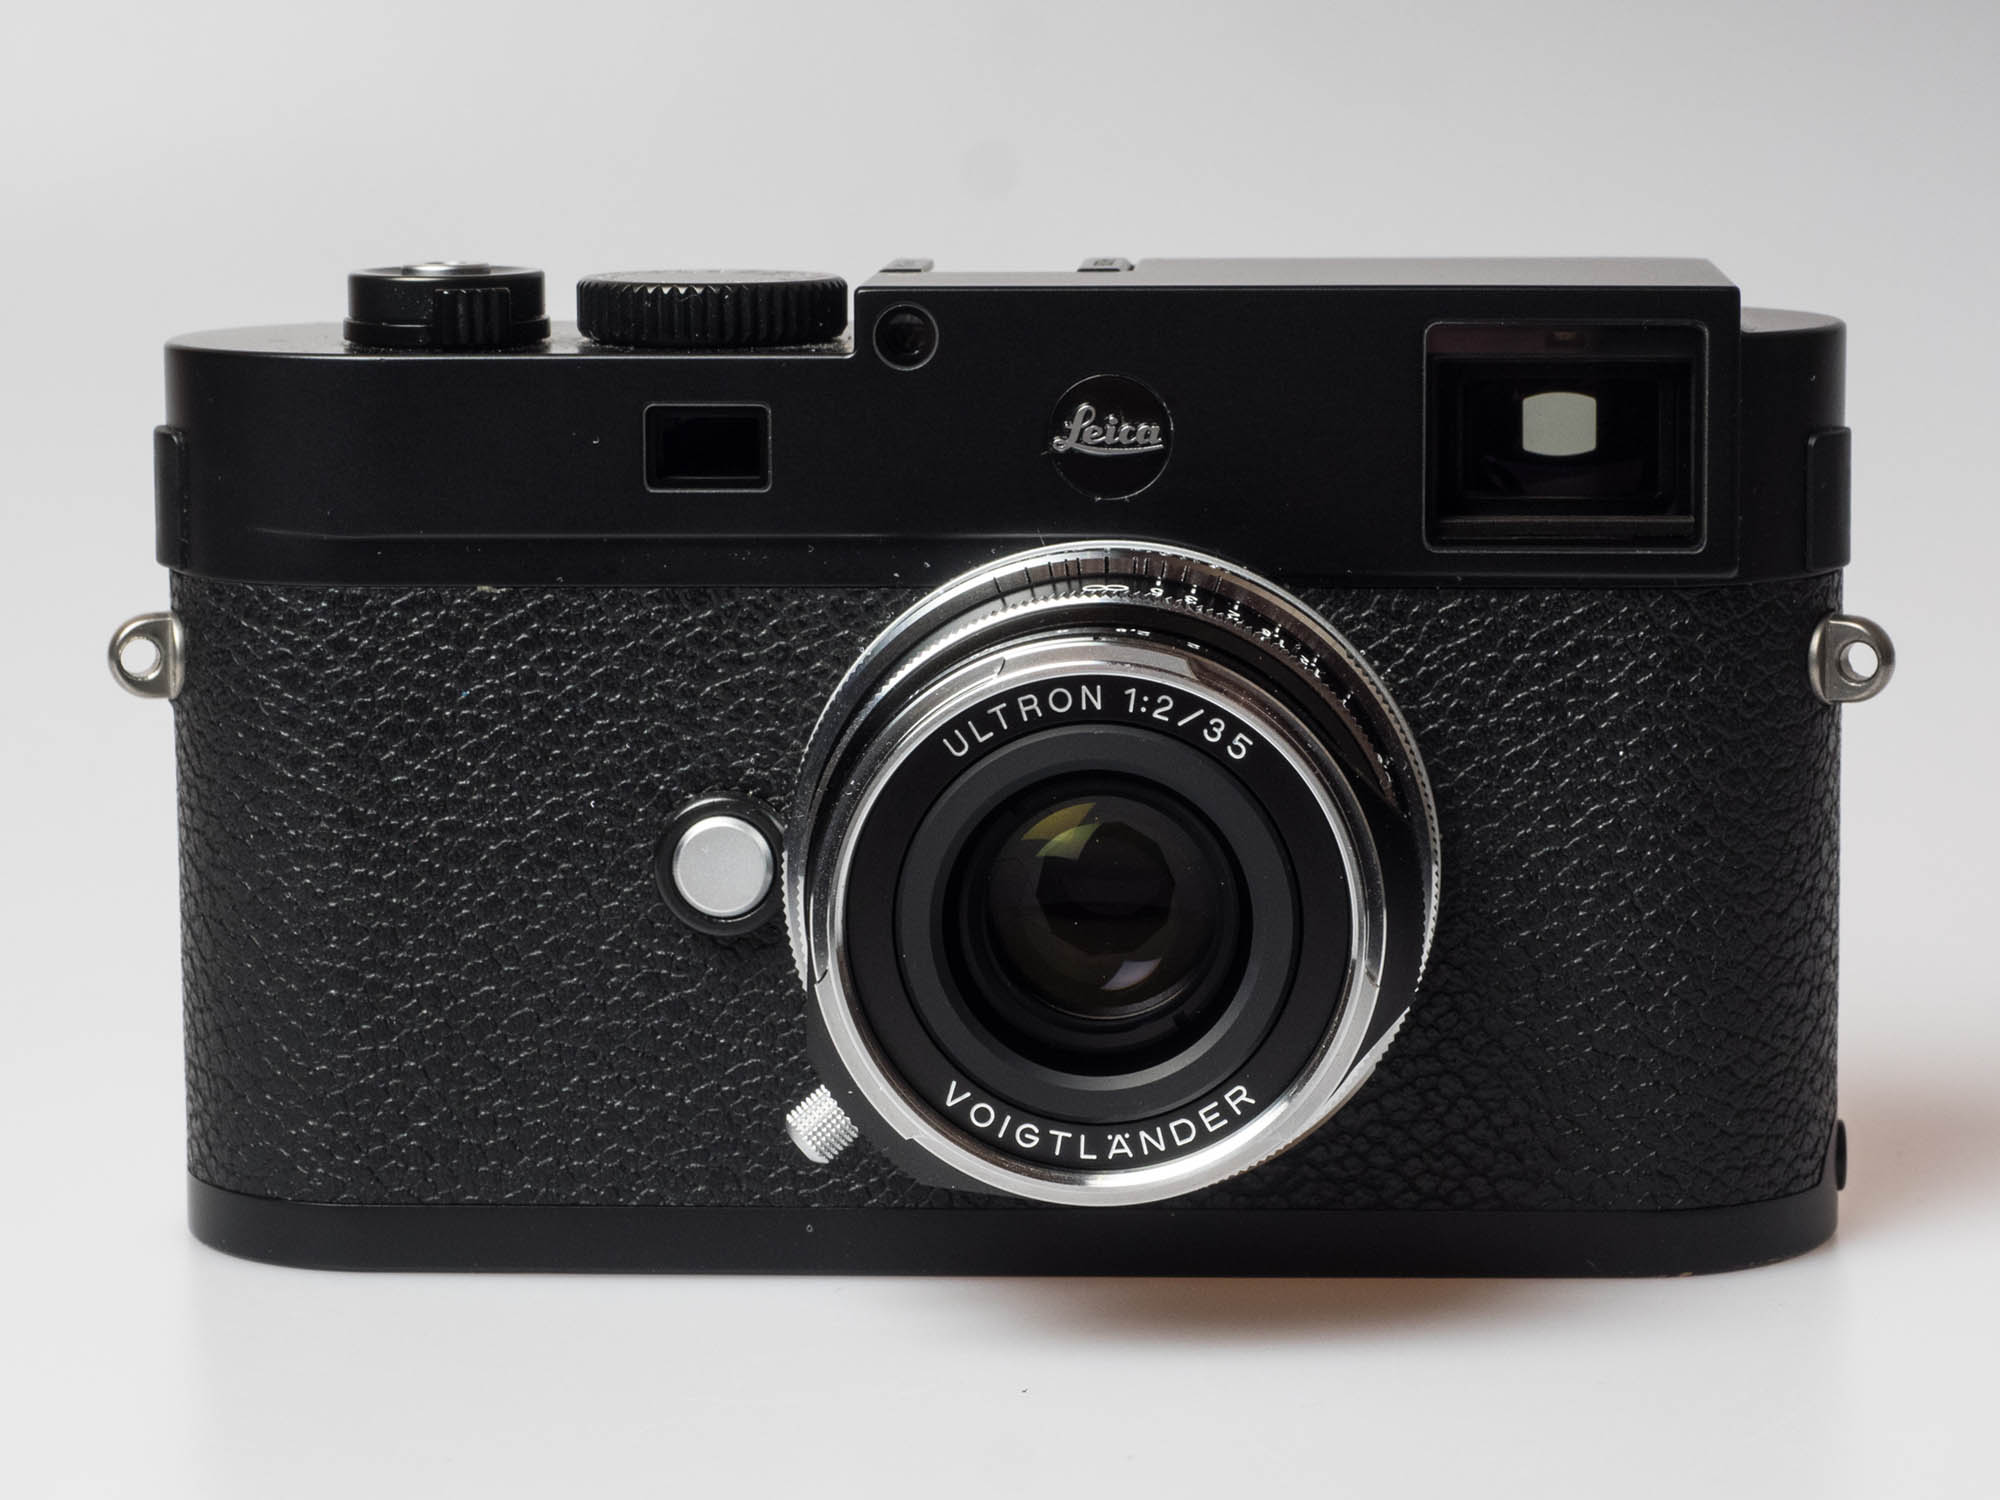 Leica M262 and Voigtländer 35/2, a typical case for the LensTagger Lightroom plugin